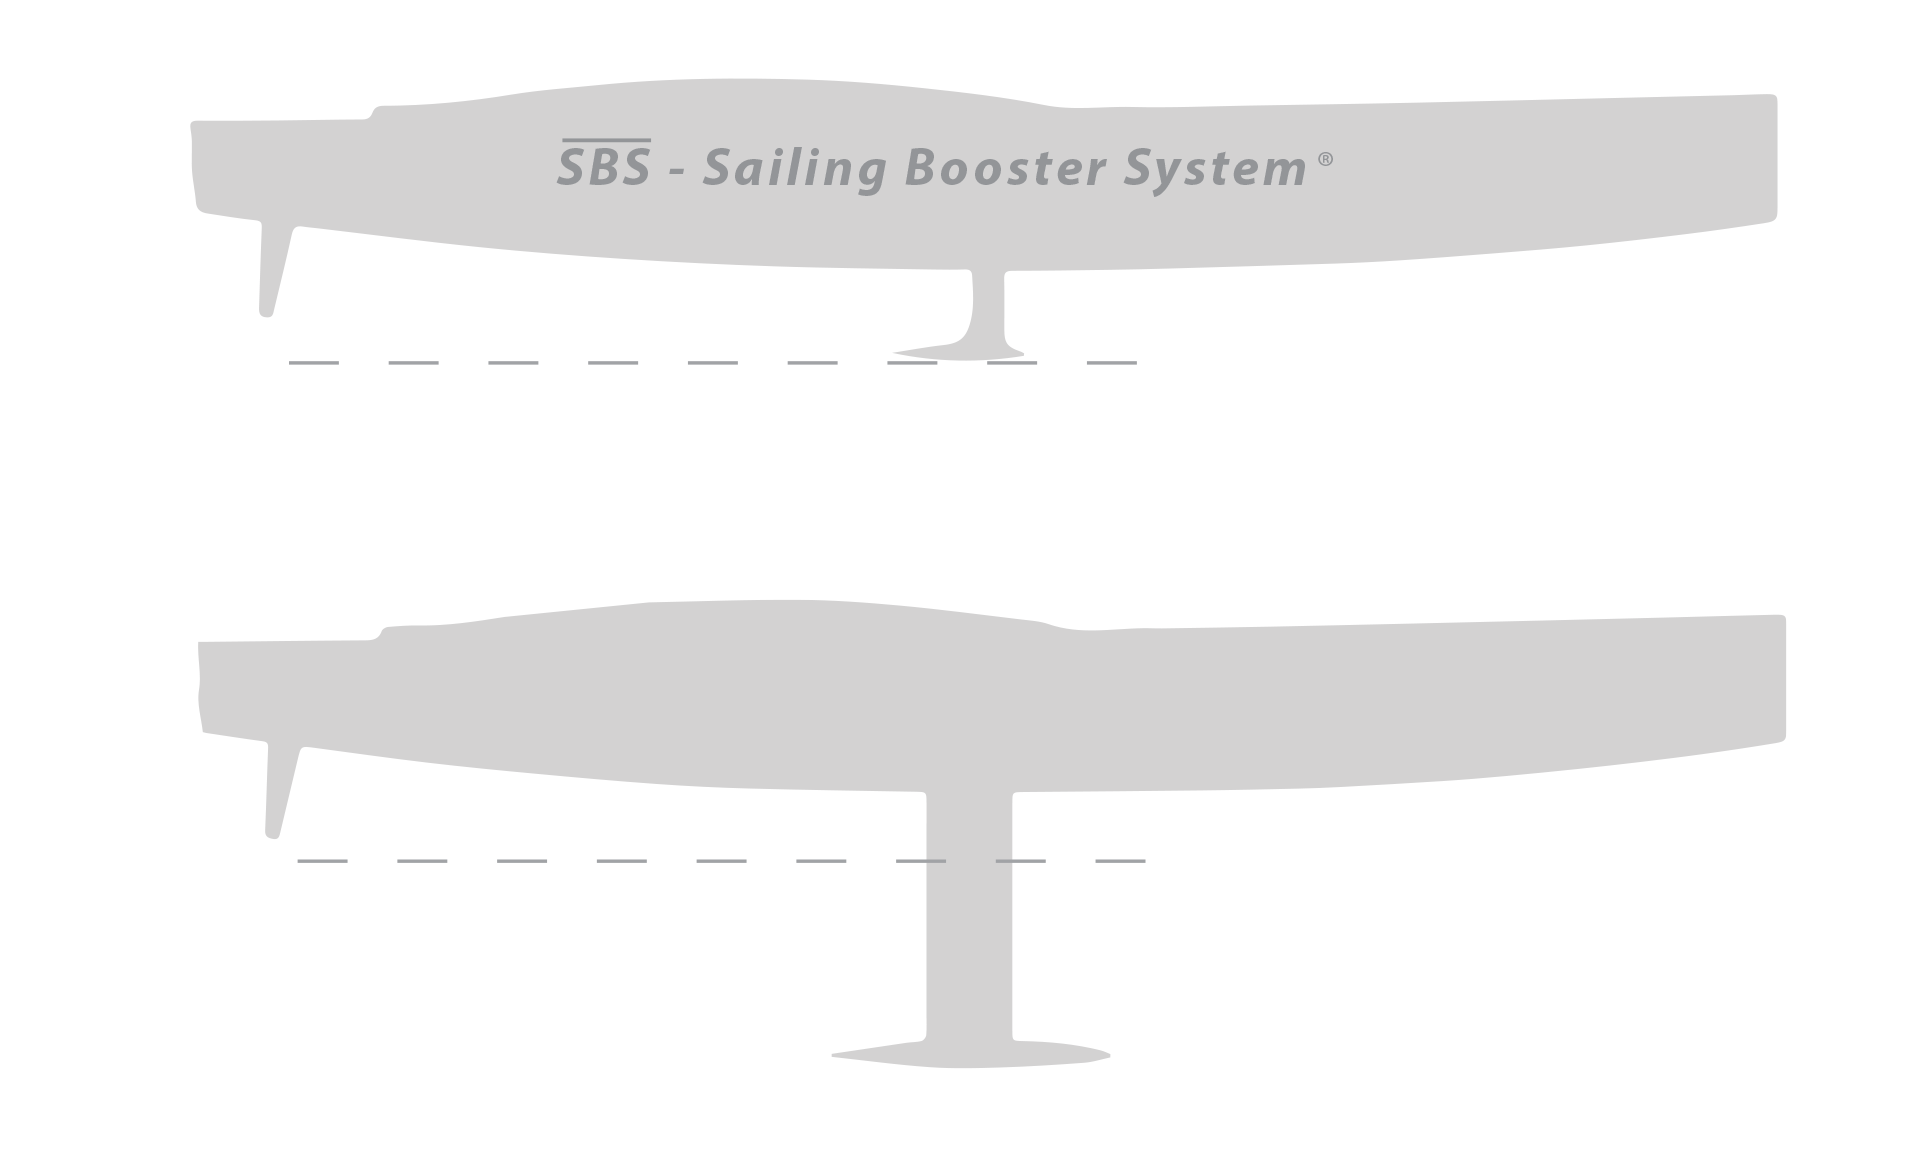 The lift wing may reduce bulb keel weight up to 68%. 
For example, in a 10 ton ballast keel, you may save up to 6.8 tons*.
* ask assistance from a naval engineer or architect to balance your project needs.
